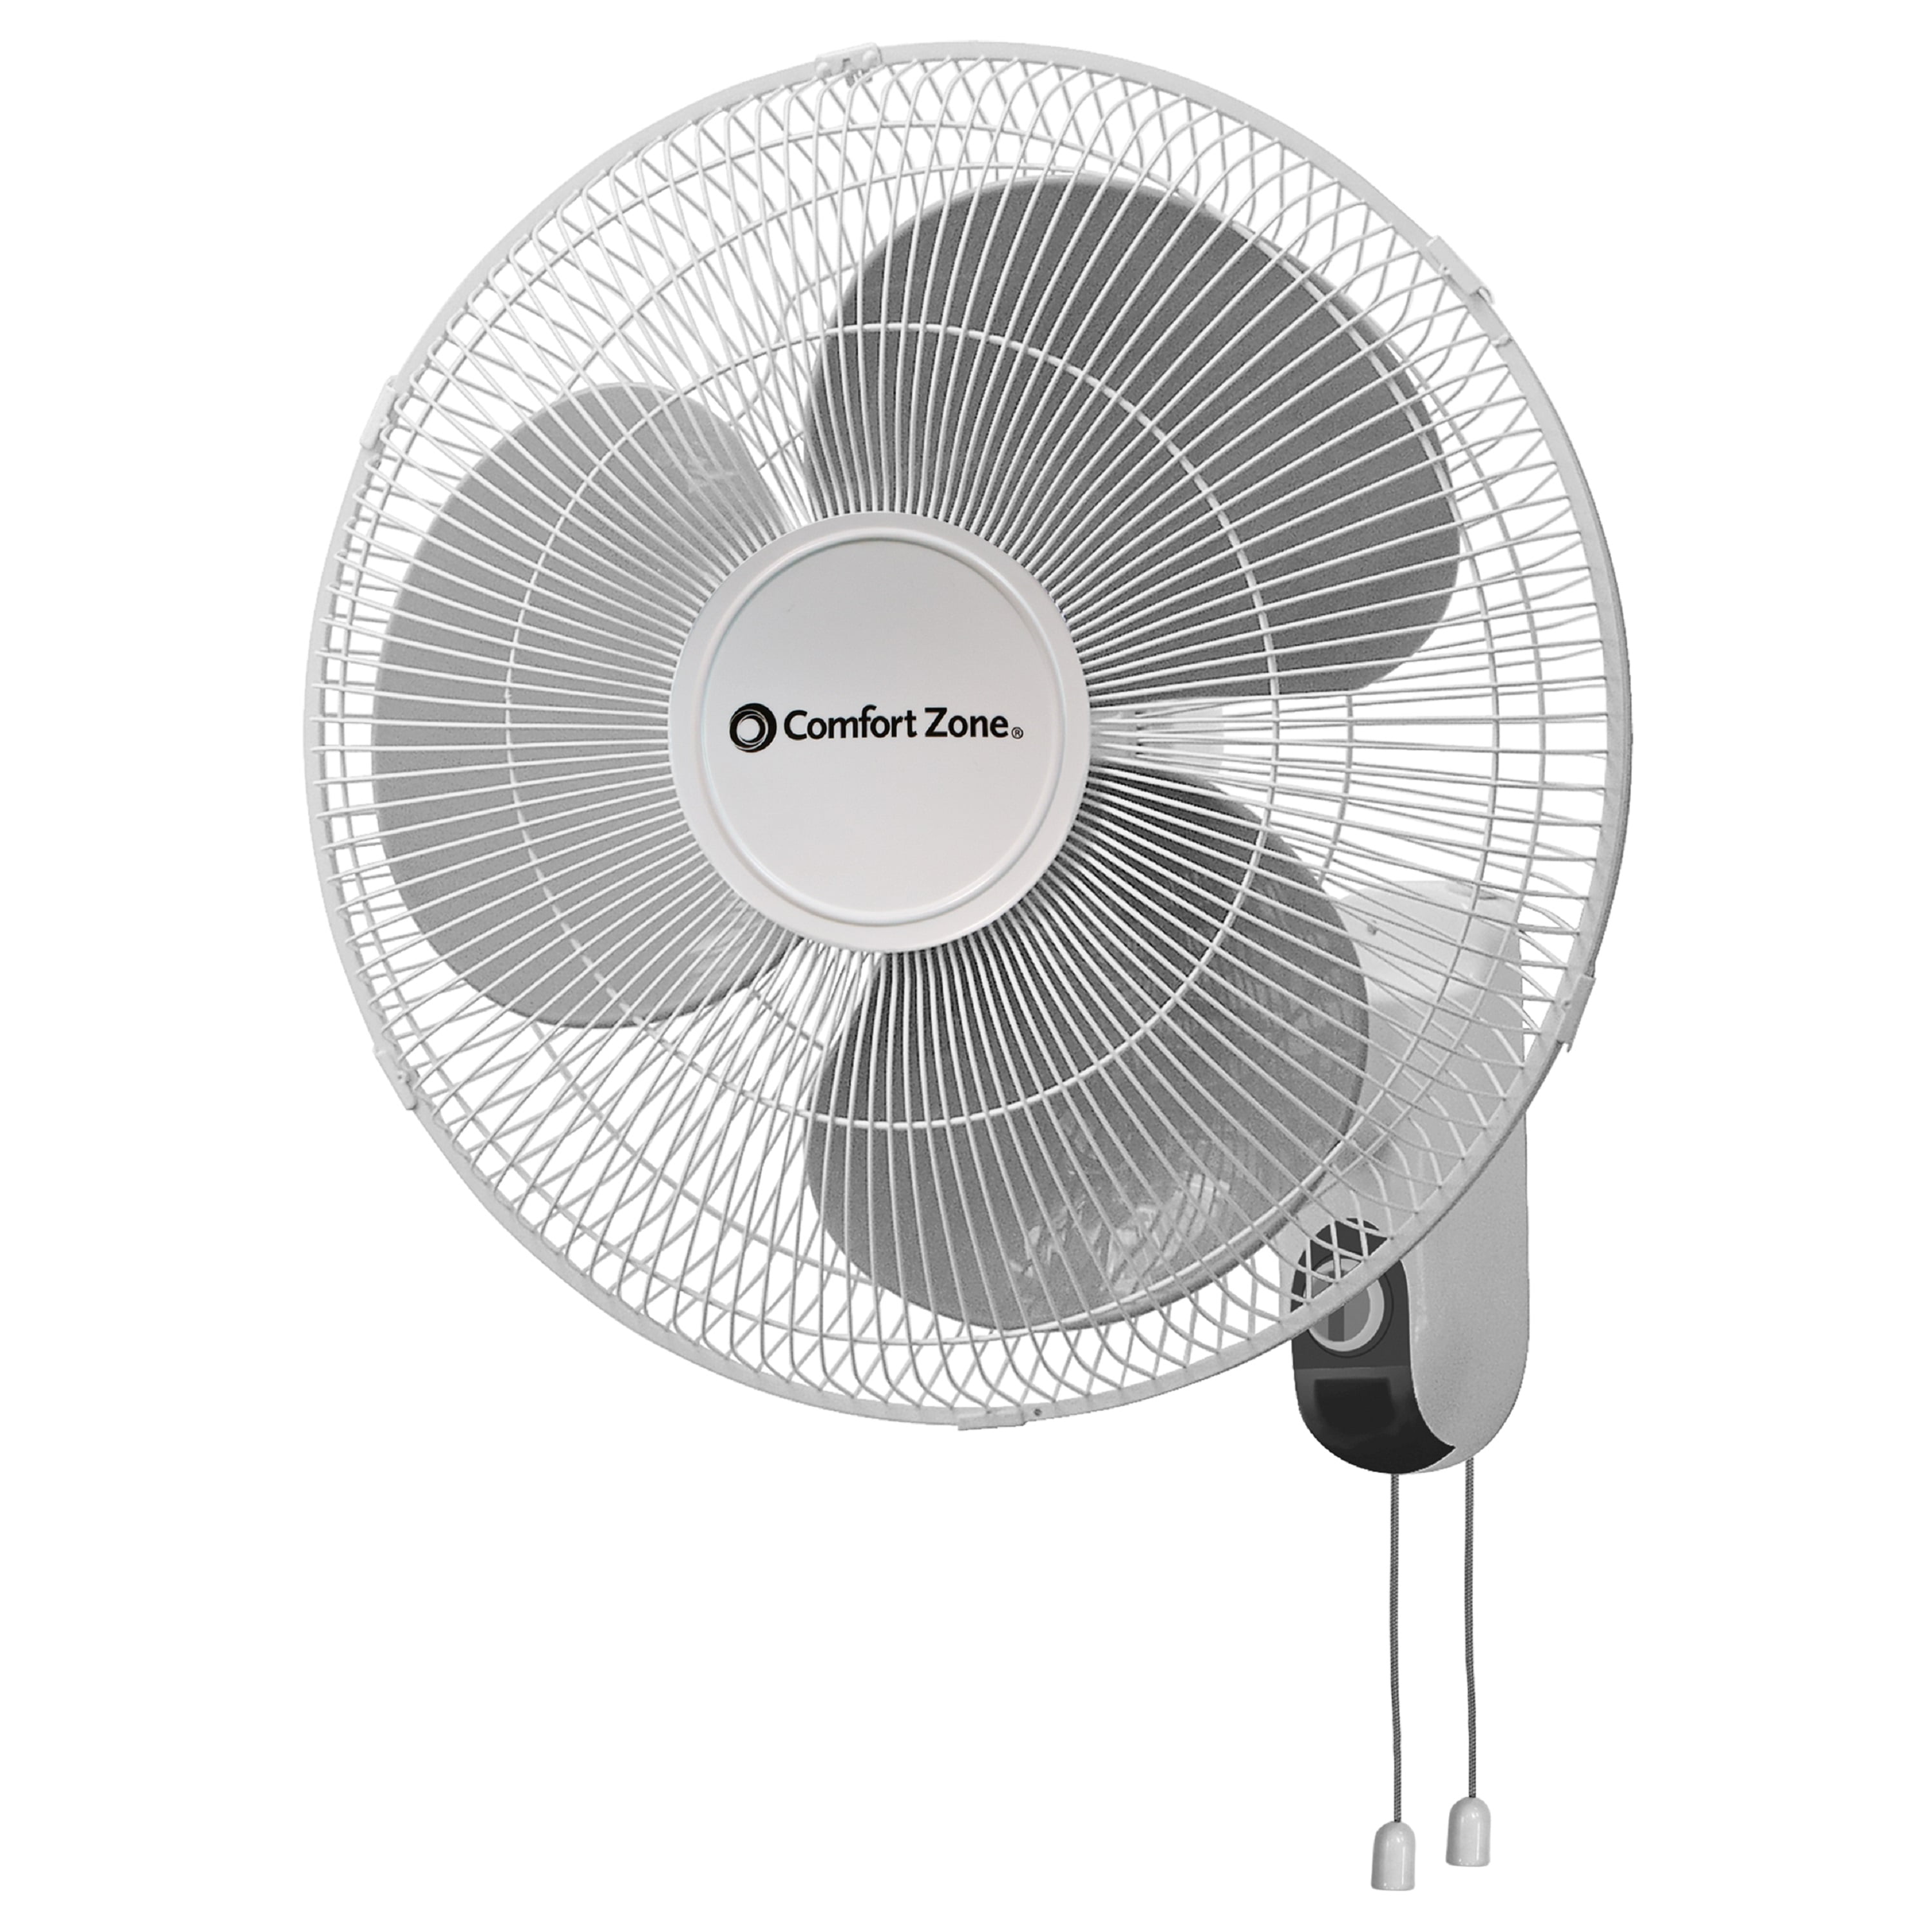 16 Wall FAN Oscillating Wall Mounted Remote Control industrial Heavy Duty Electric Cooling Fan Air Cool Fan with 3 Speed Home Office Commercial Fans White 